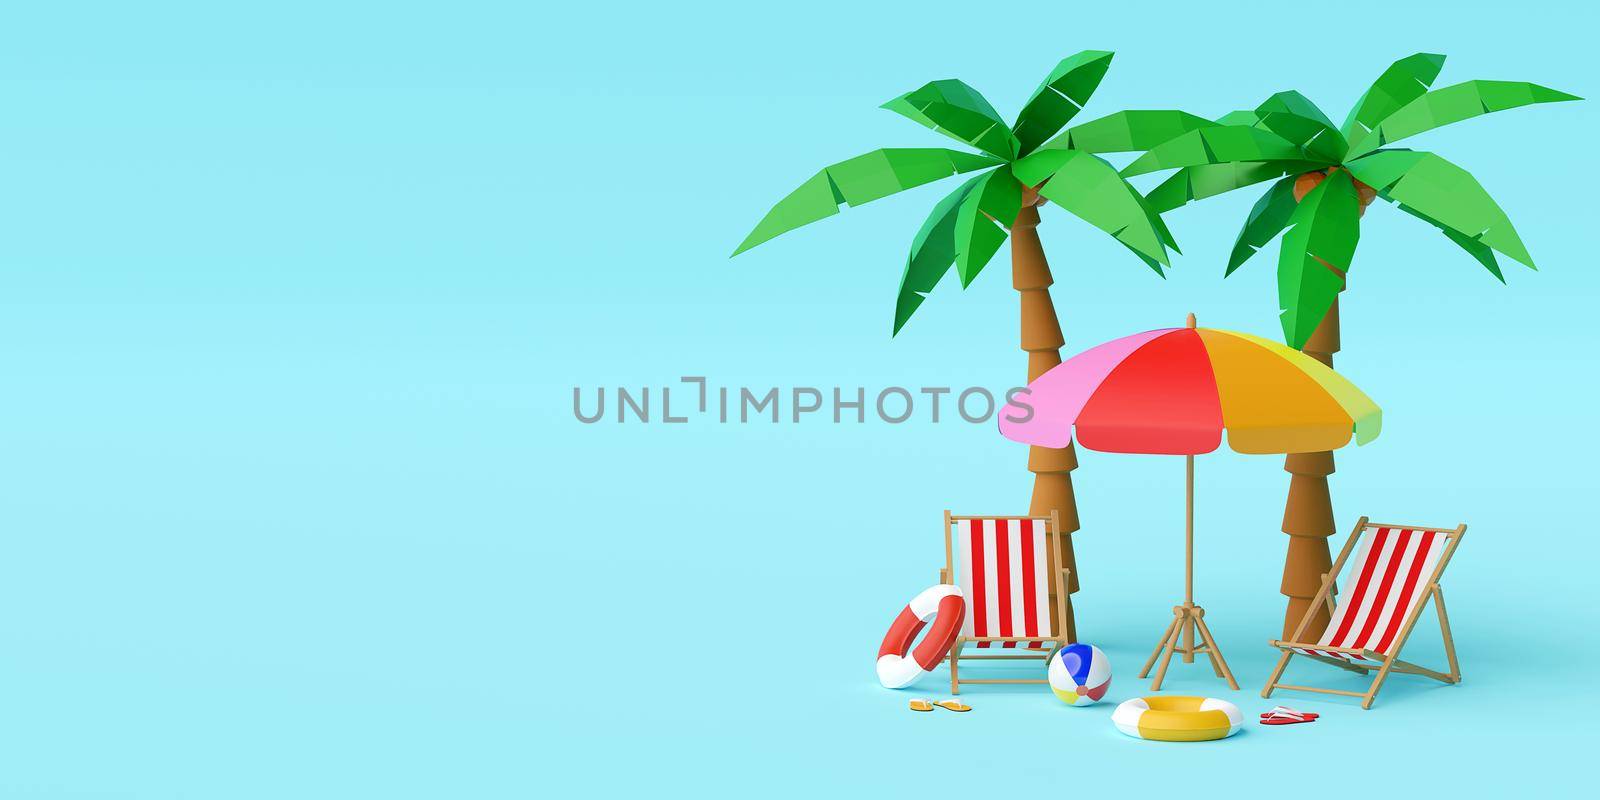 Summer vacation concept, Beach umbrella, chairs and accessories under palm tree on blue background, 3d illustration